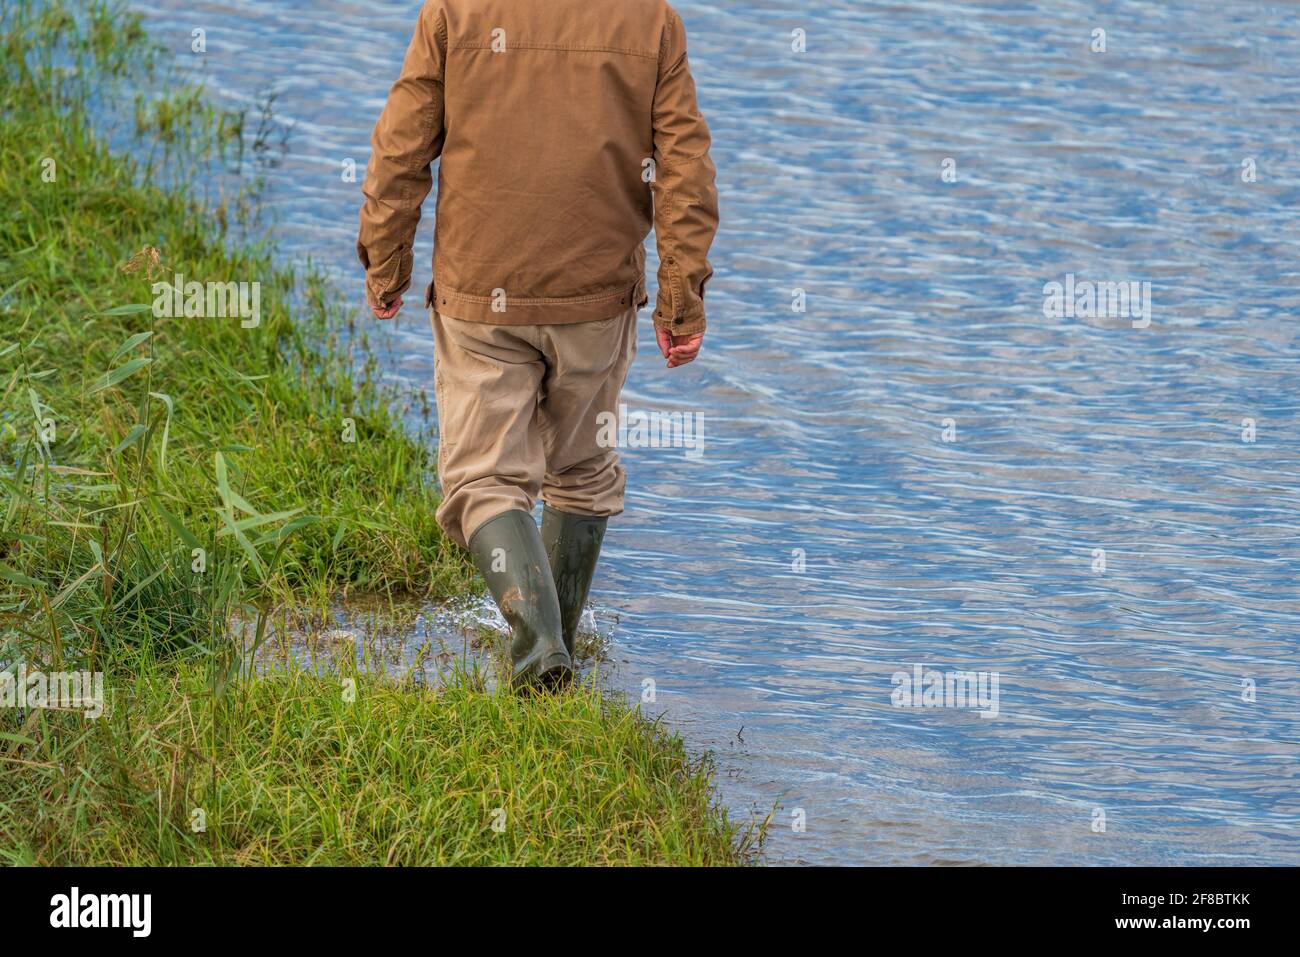 Unrecognizable person walking near flooded road edge Stock Photo